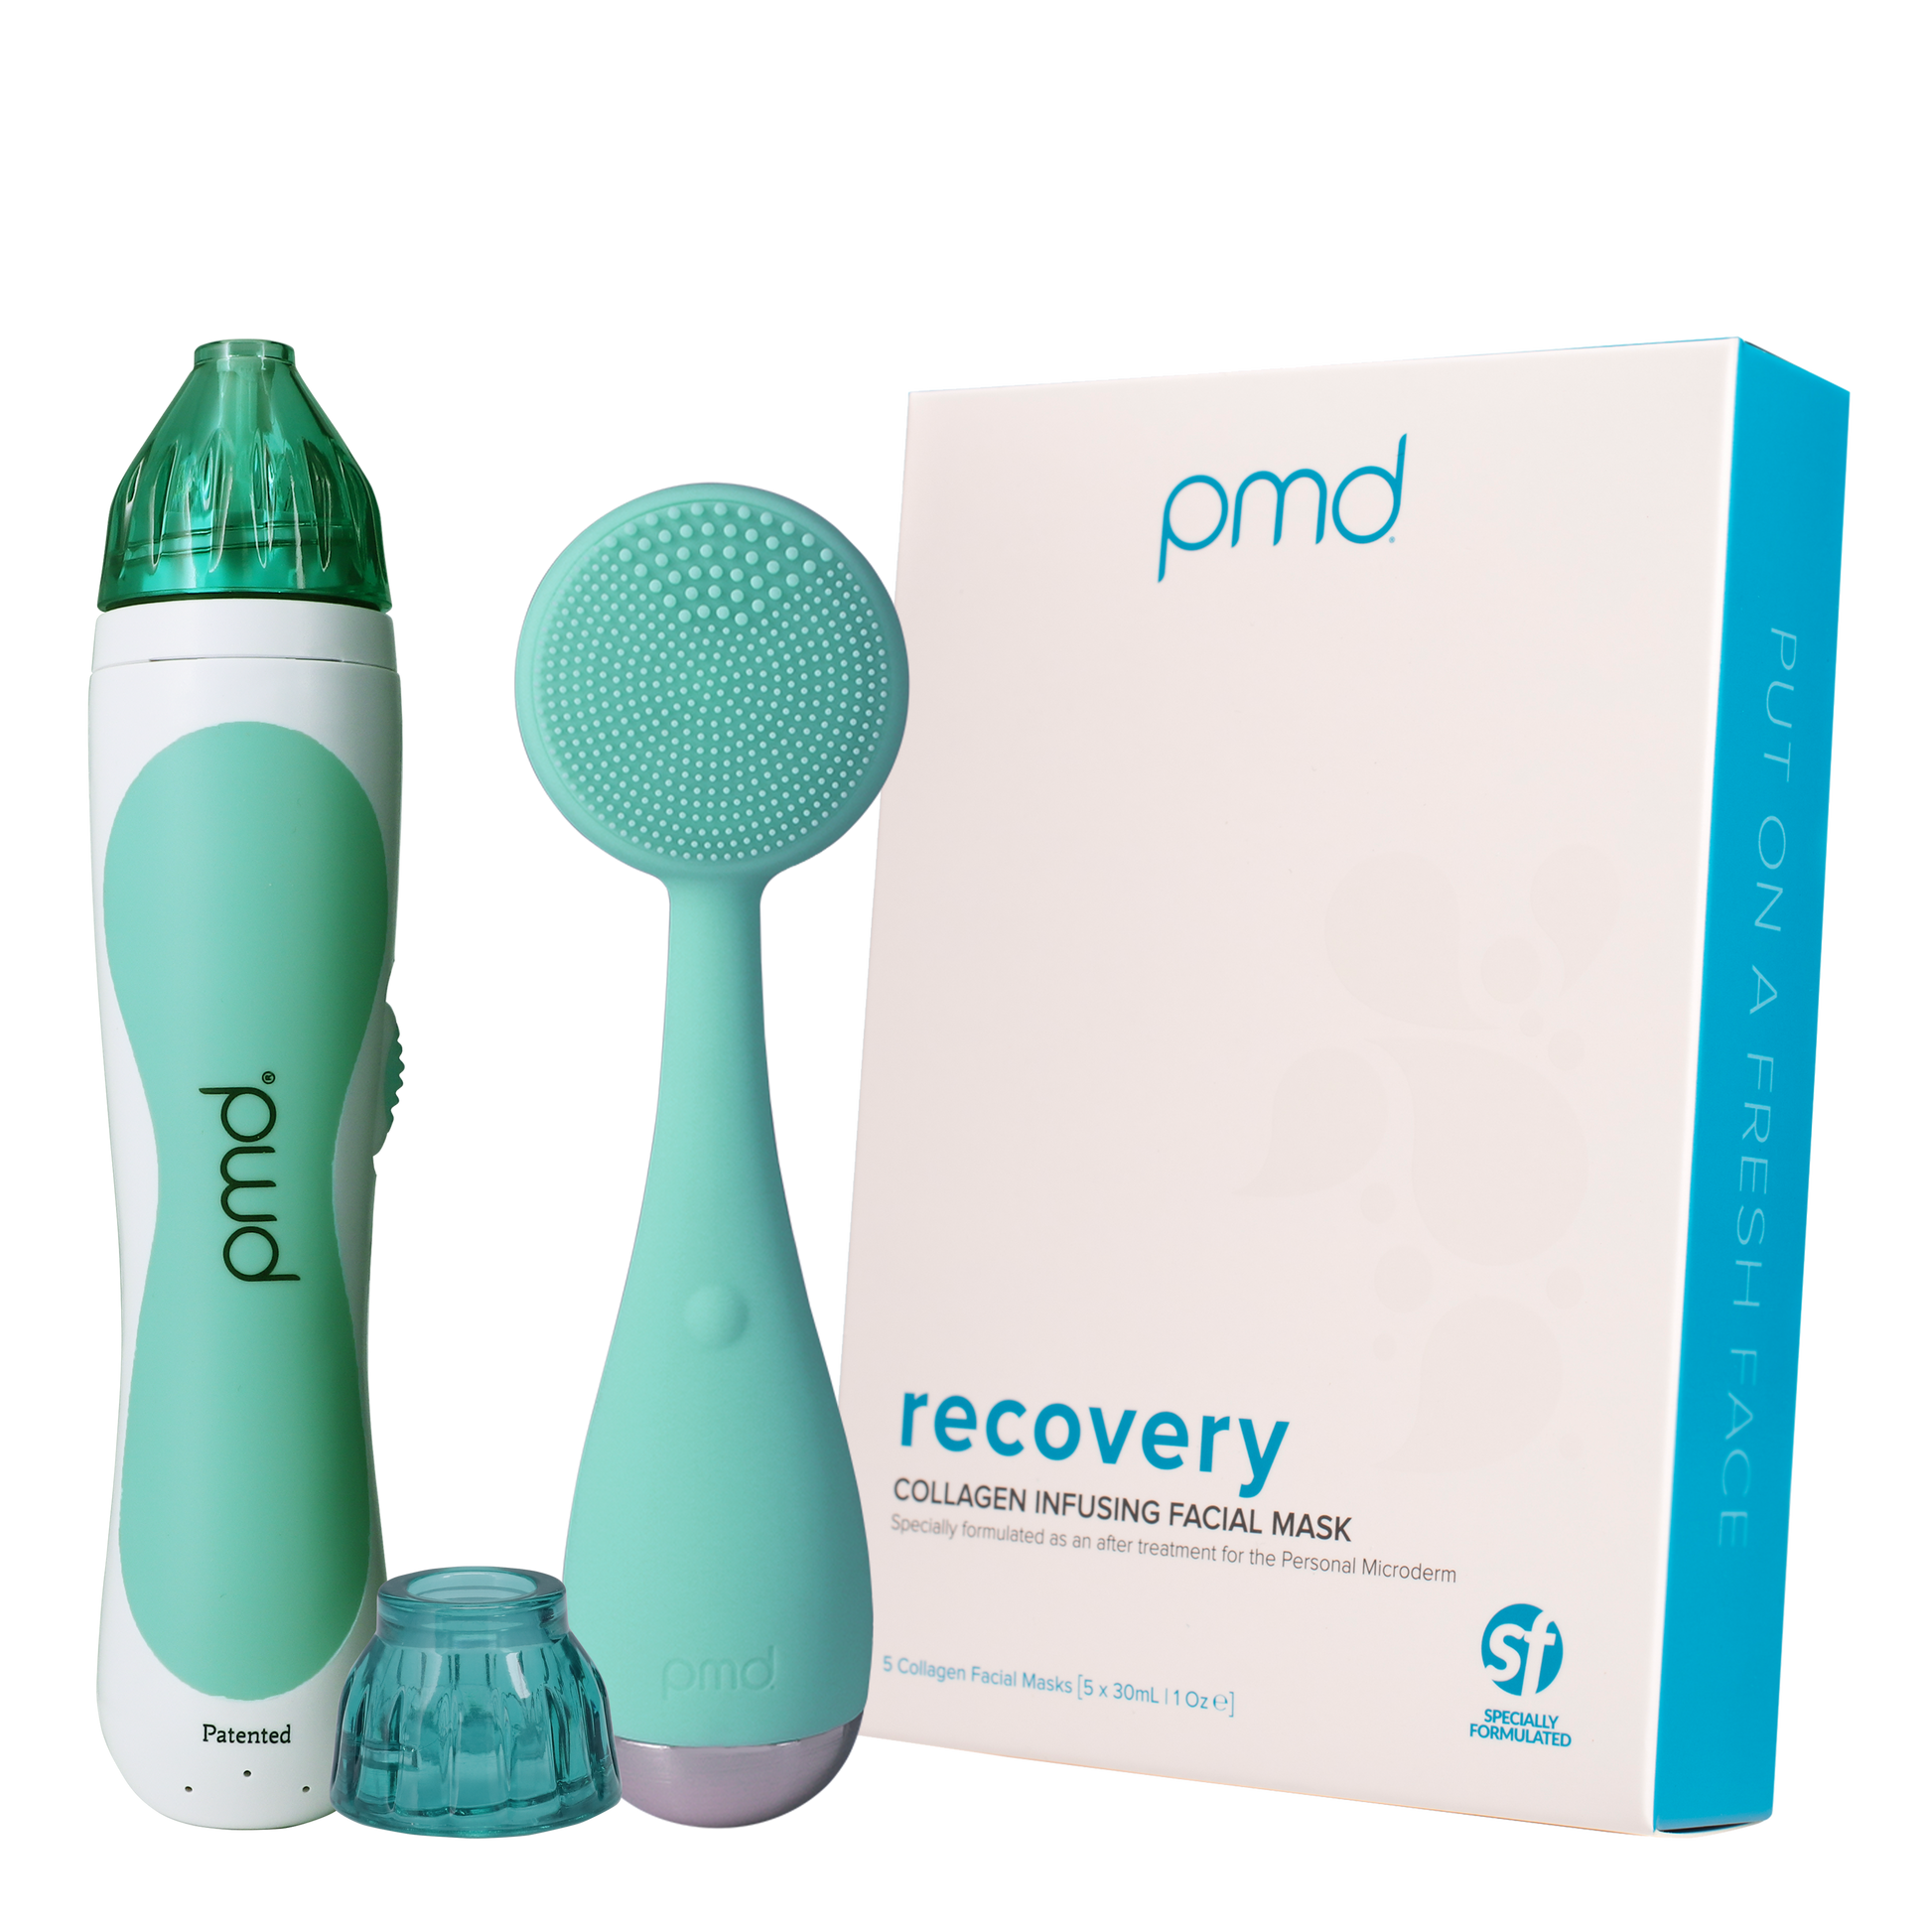 fresh_face_classic_bundle_teal?Personal Microderm Classic in Teal, PMD Clean in Teal, Box of Recovery Masks